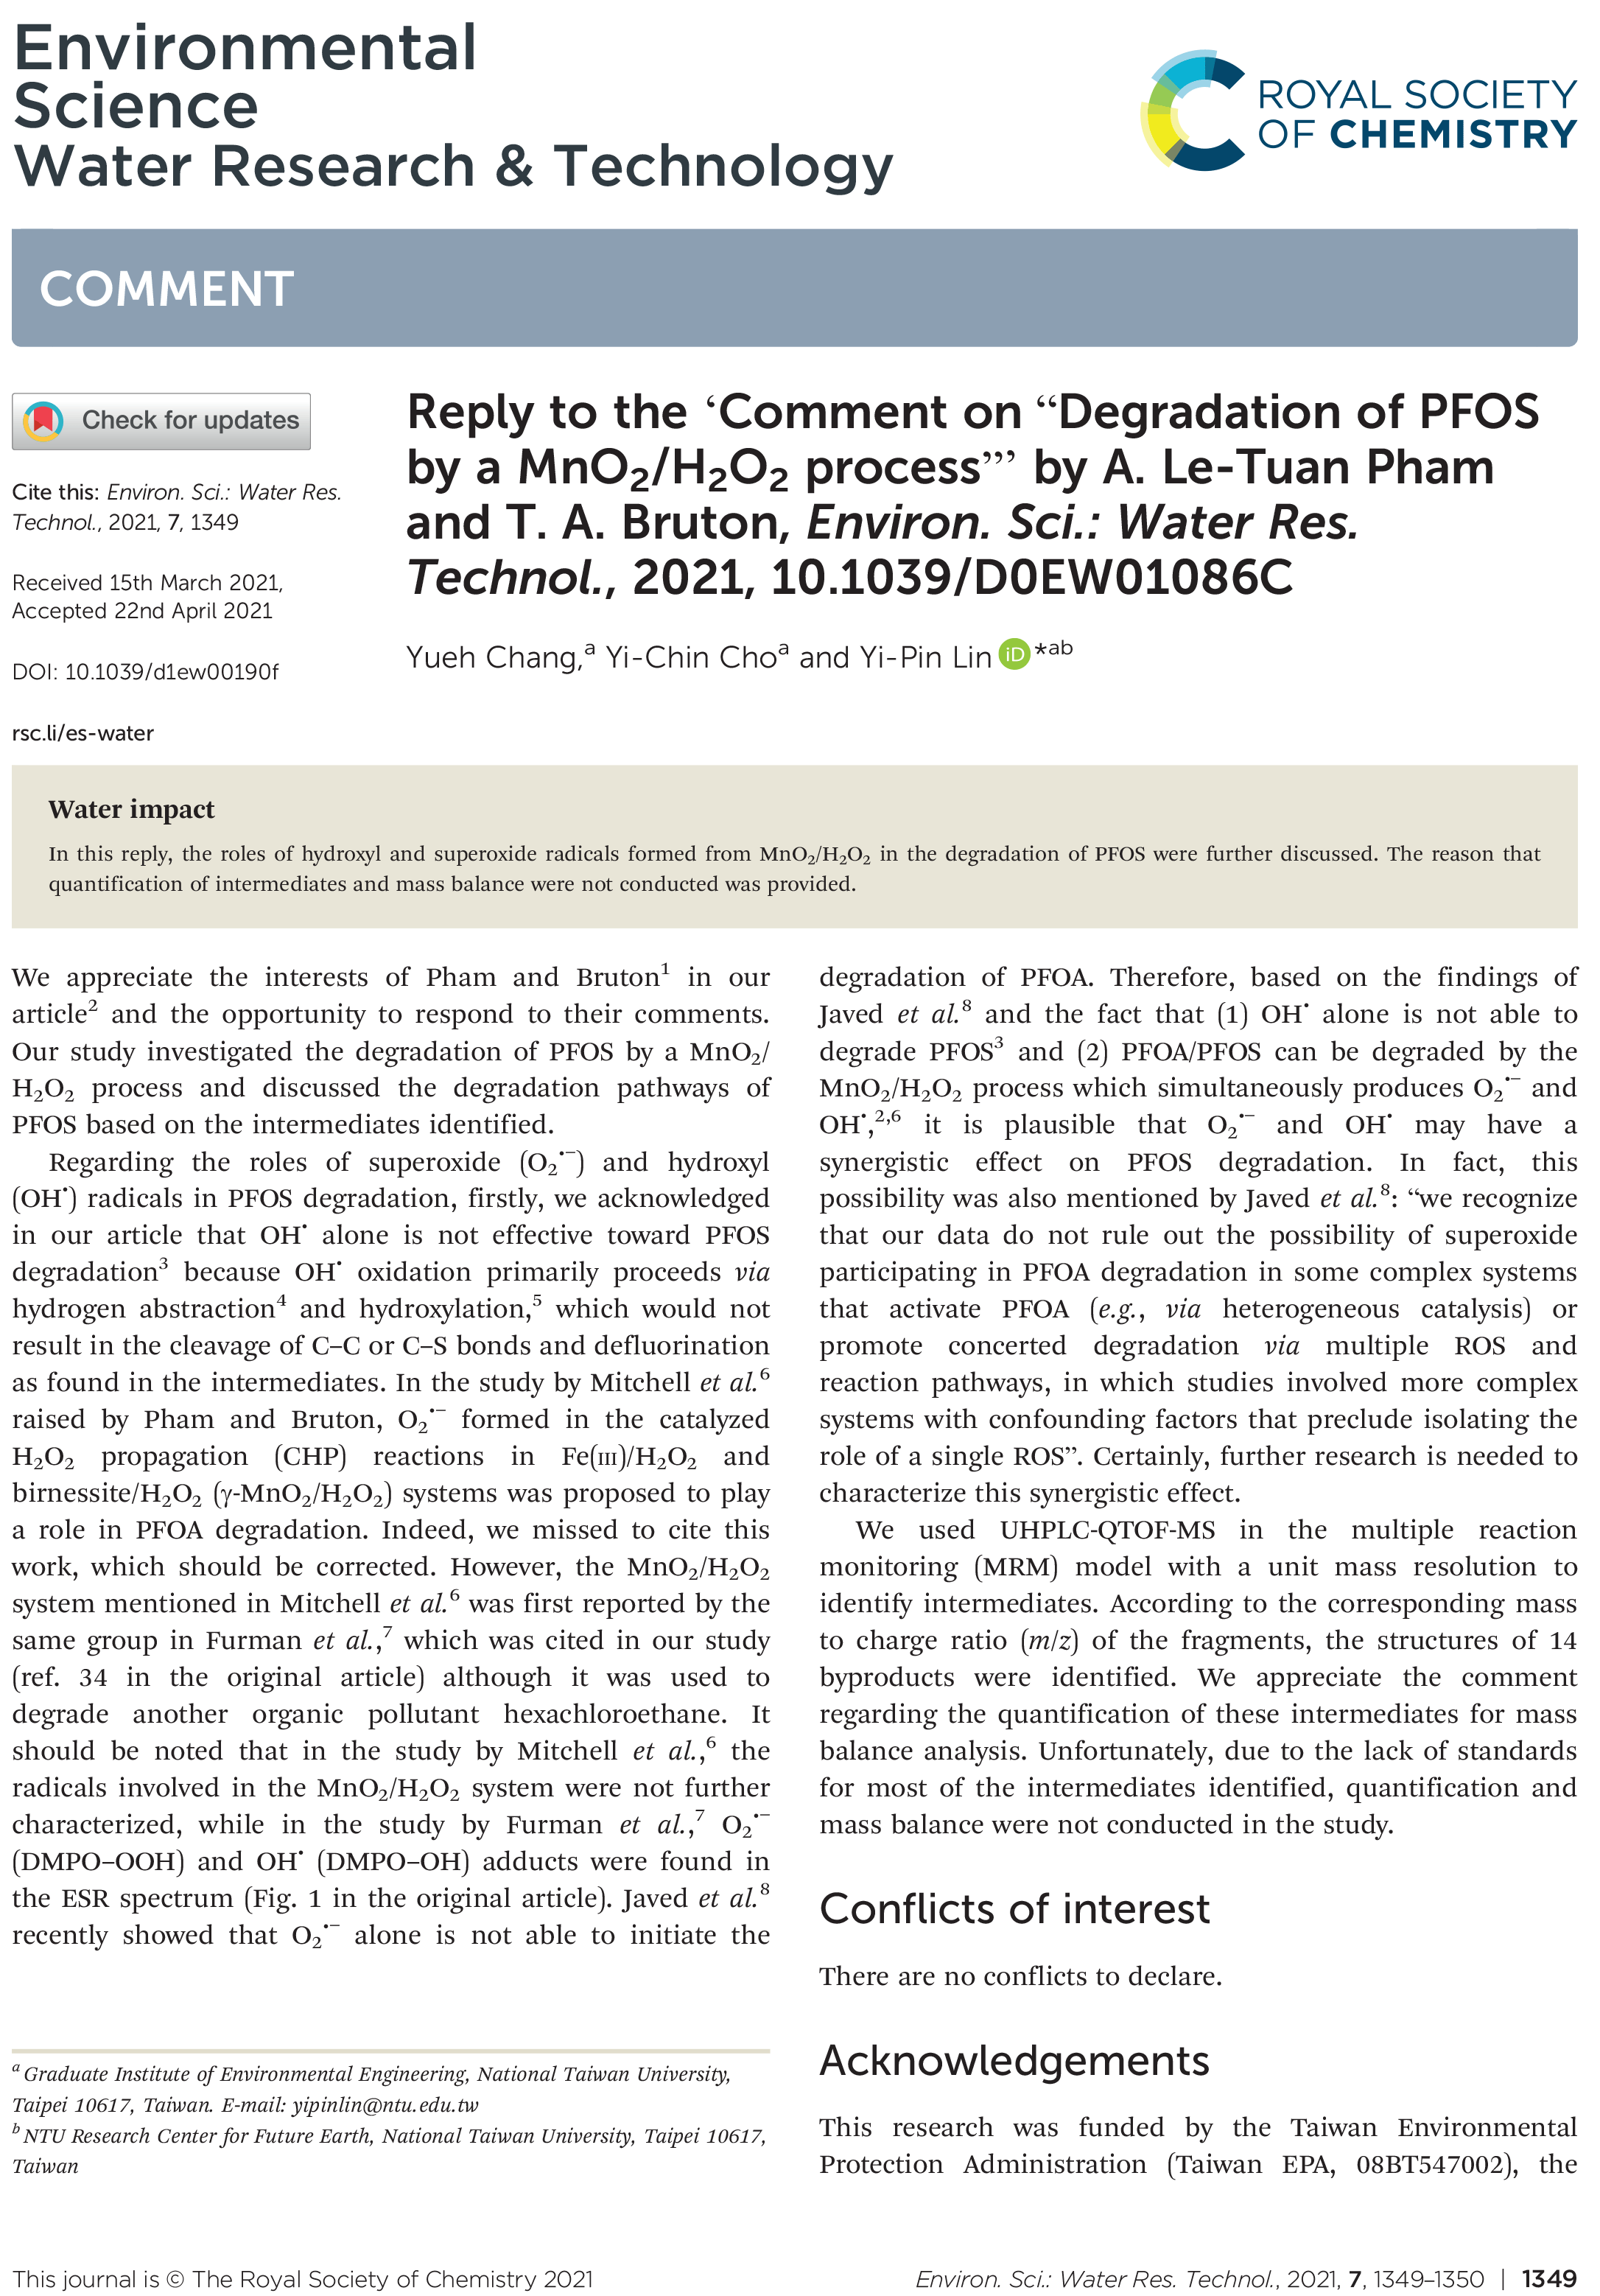 Reply to the ‘Comment on “Degradation of PFOS by a MnO2/H2O2 process”’ by A. Le-Tuan Pham and T. A. Bruton, Environ. Sci.: Water Res. Technol., 2021, 10.1039/D0EW01086C